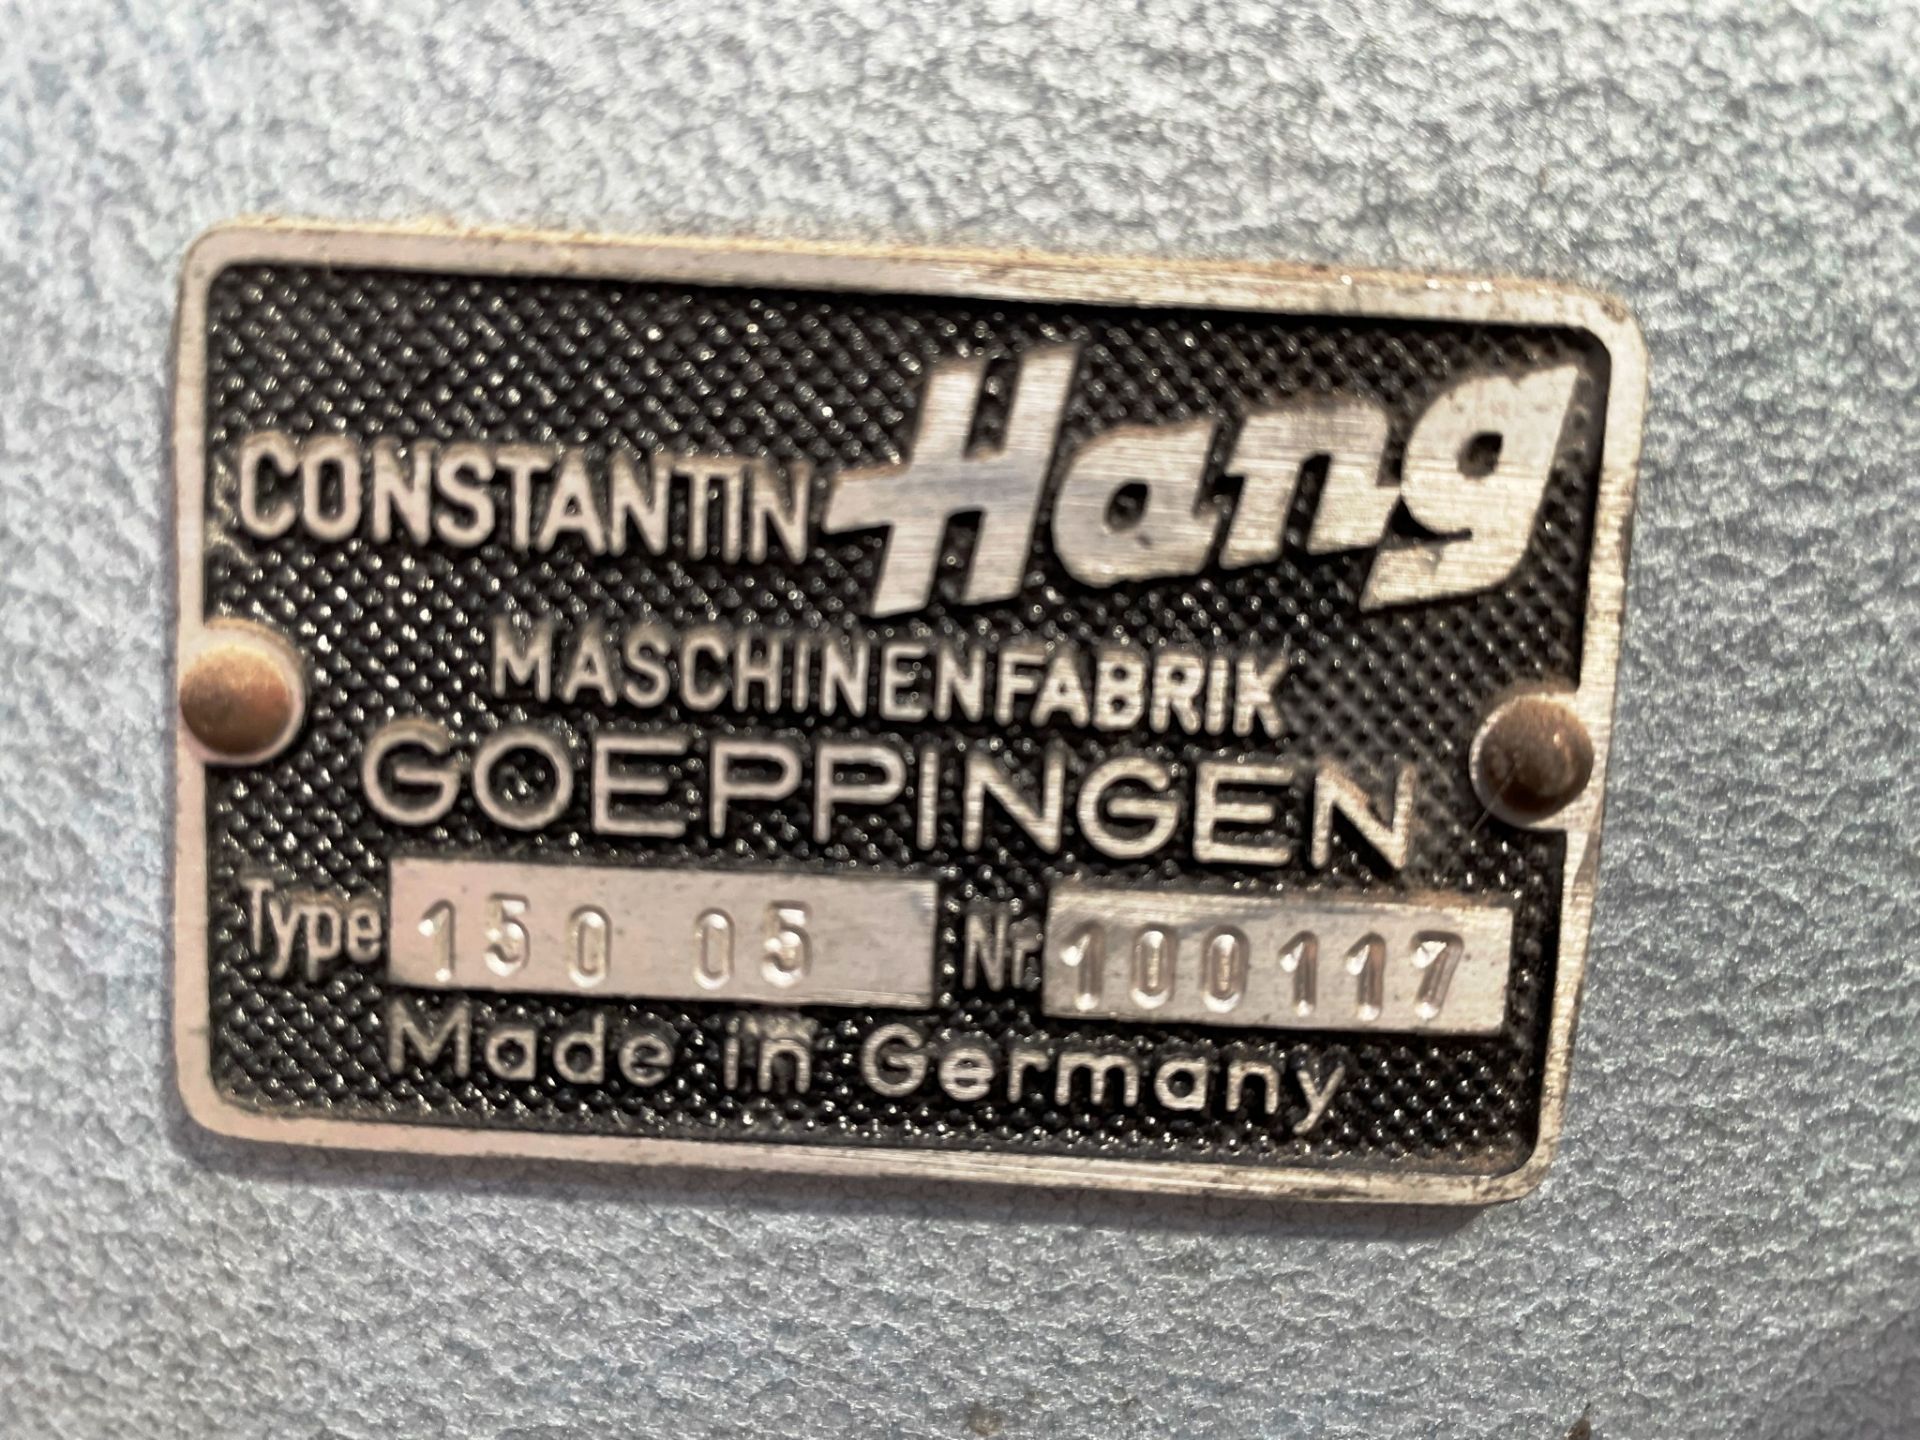 Constantin Hang 150 05 double head riveting machine - Image 4 of 6